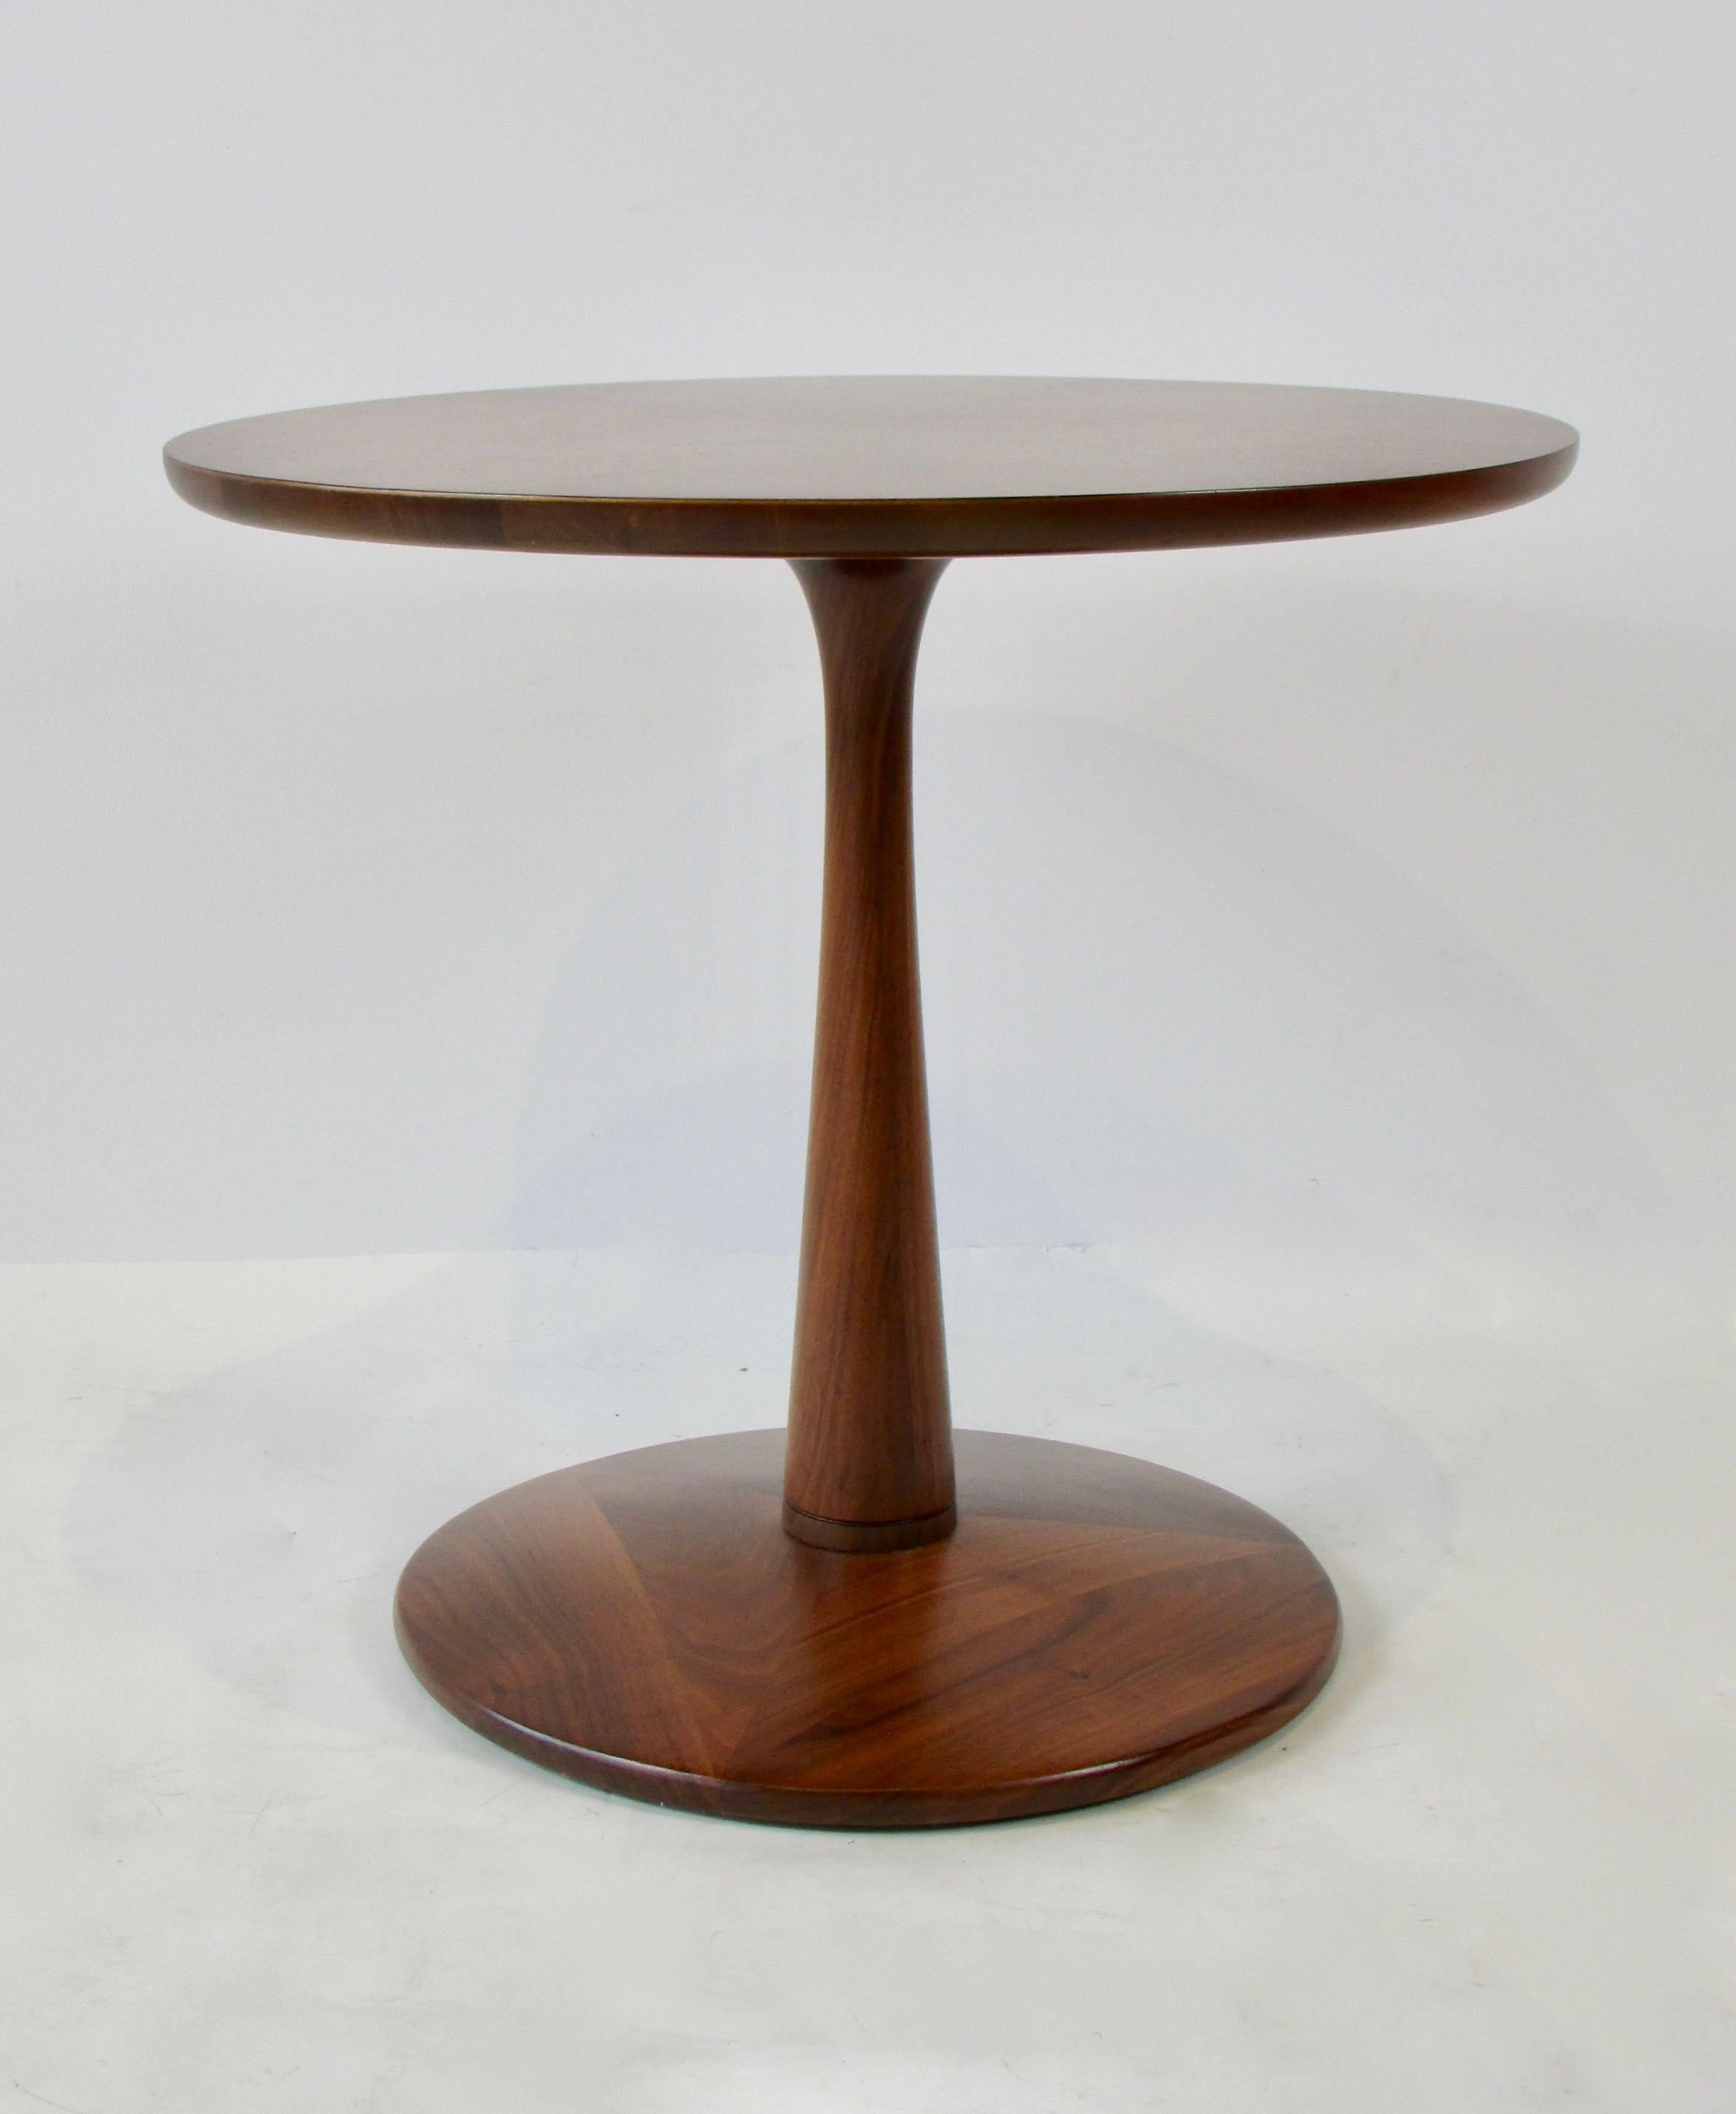 This Kipp Stewart for Drexel side table from the Drexel Declaration line features a beautiful walnut veneer and elegant pedestal base. Very recently professionally restored.